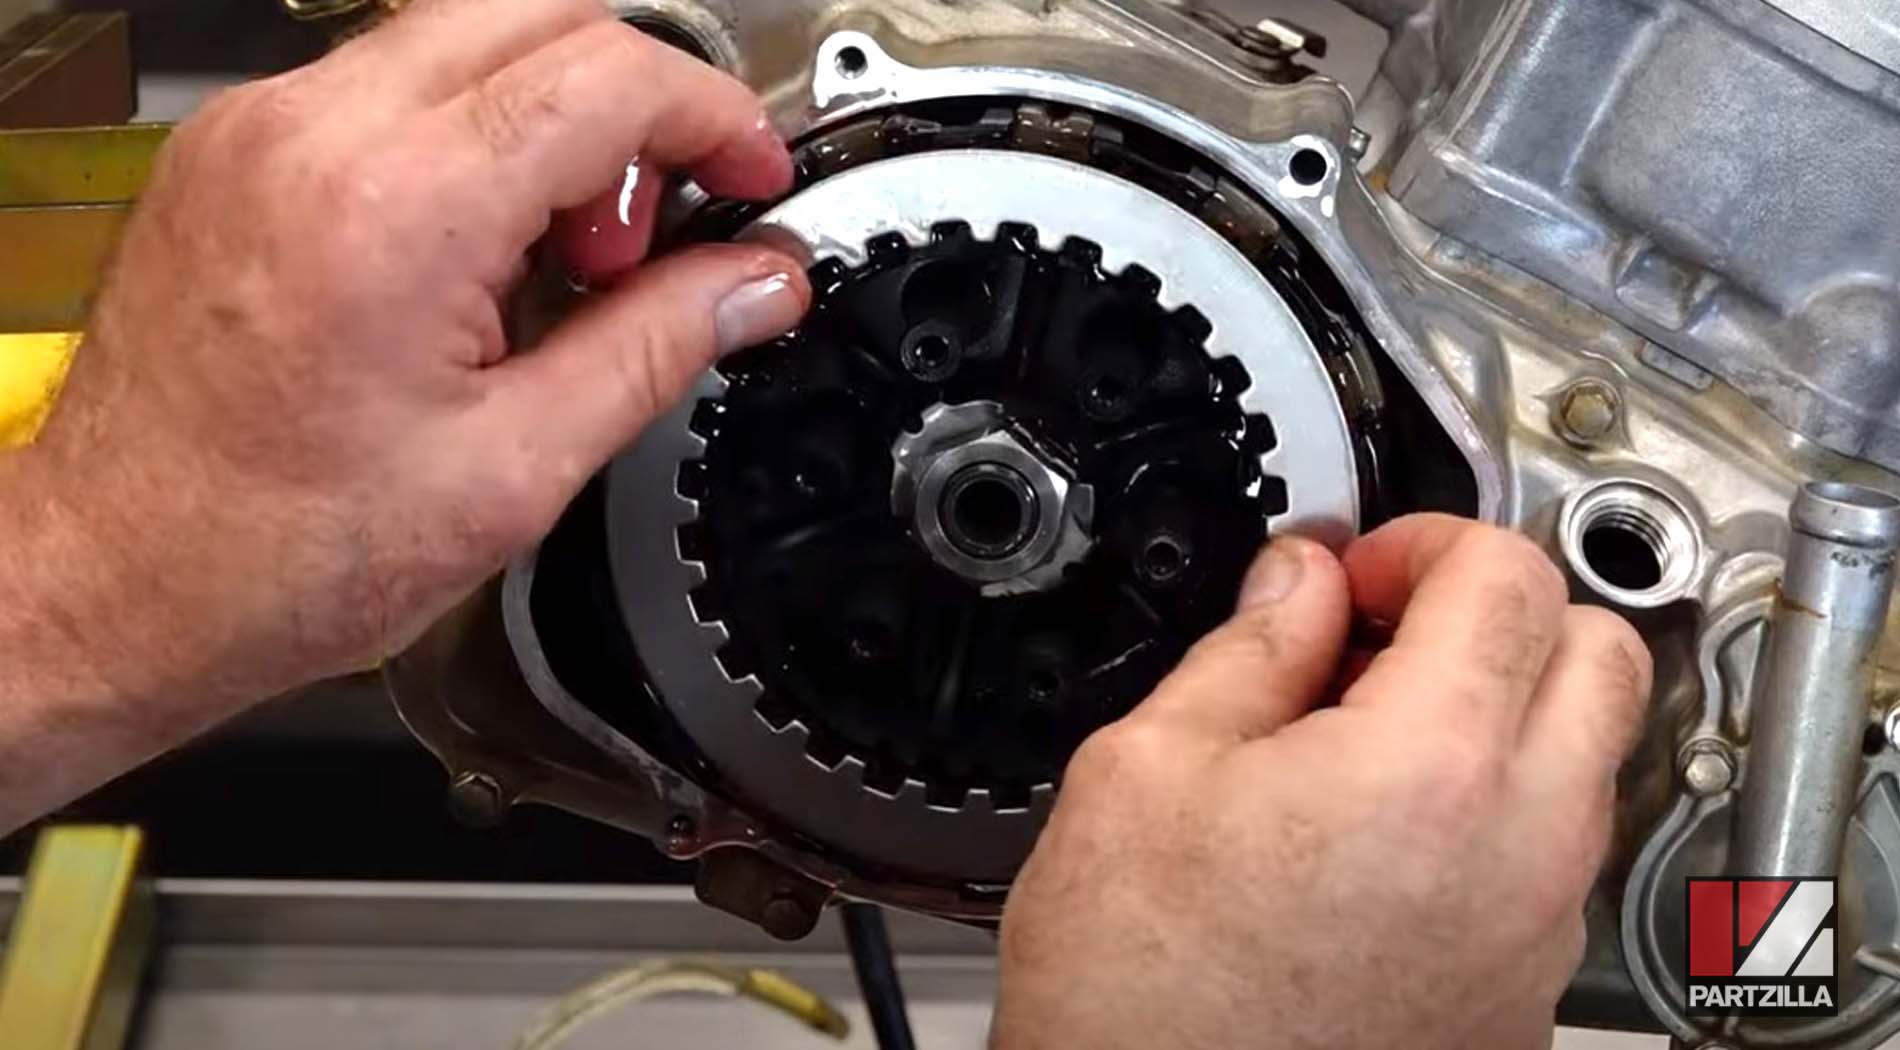 Honda CRF450 clutch replacement plates installation